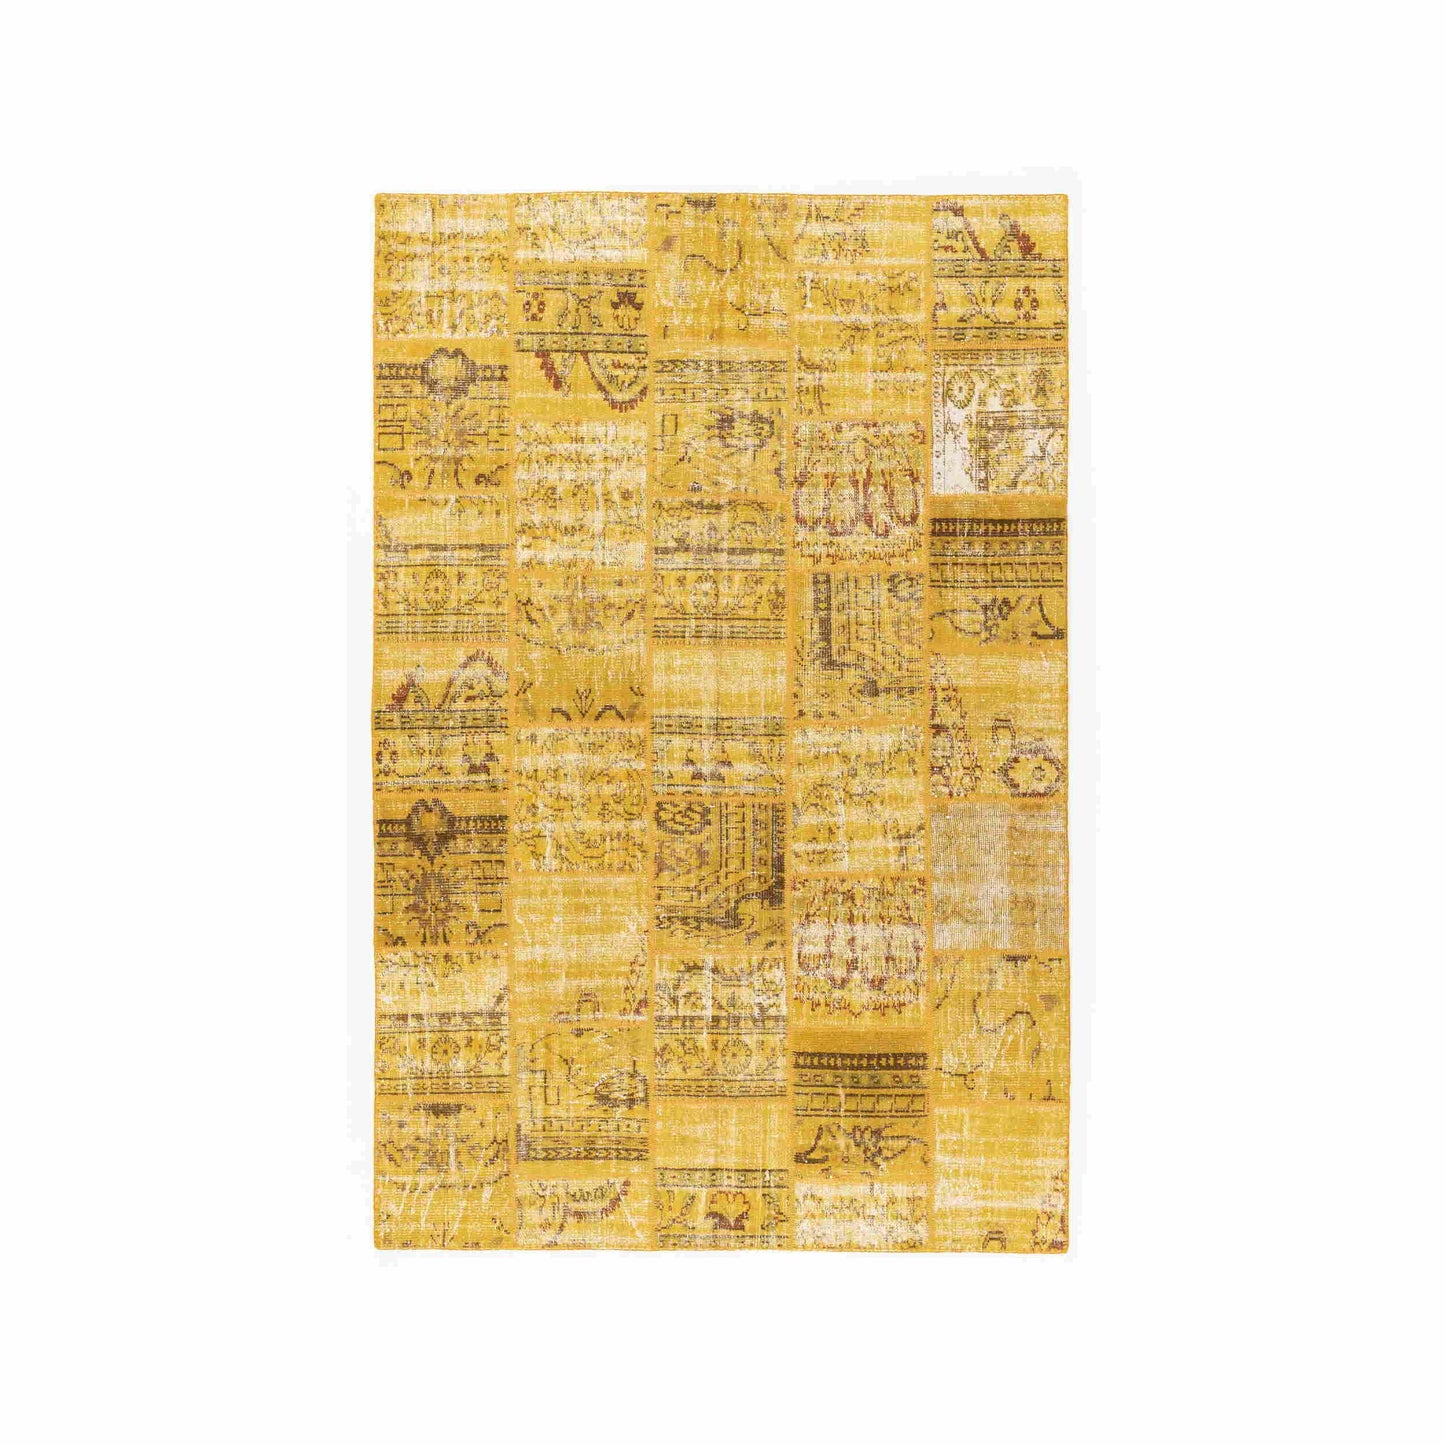 Oriental Rug Patchwork Hand Knotted Wool On Cotton 198 x 300 Cm - 6' 6'' x 9' 11'' Yellow C006 ER23